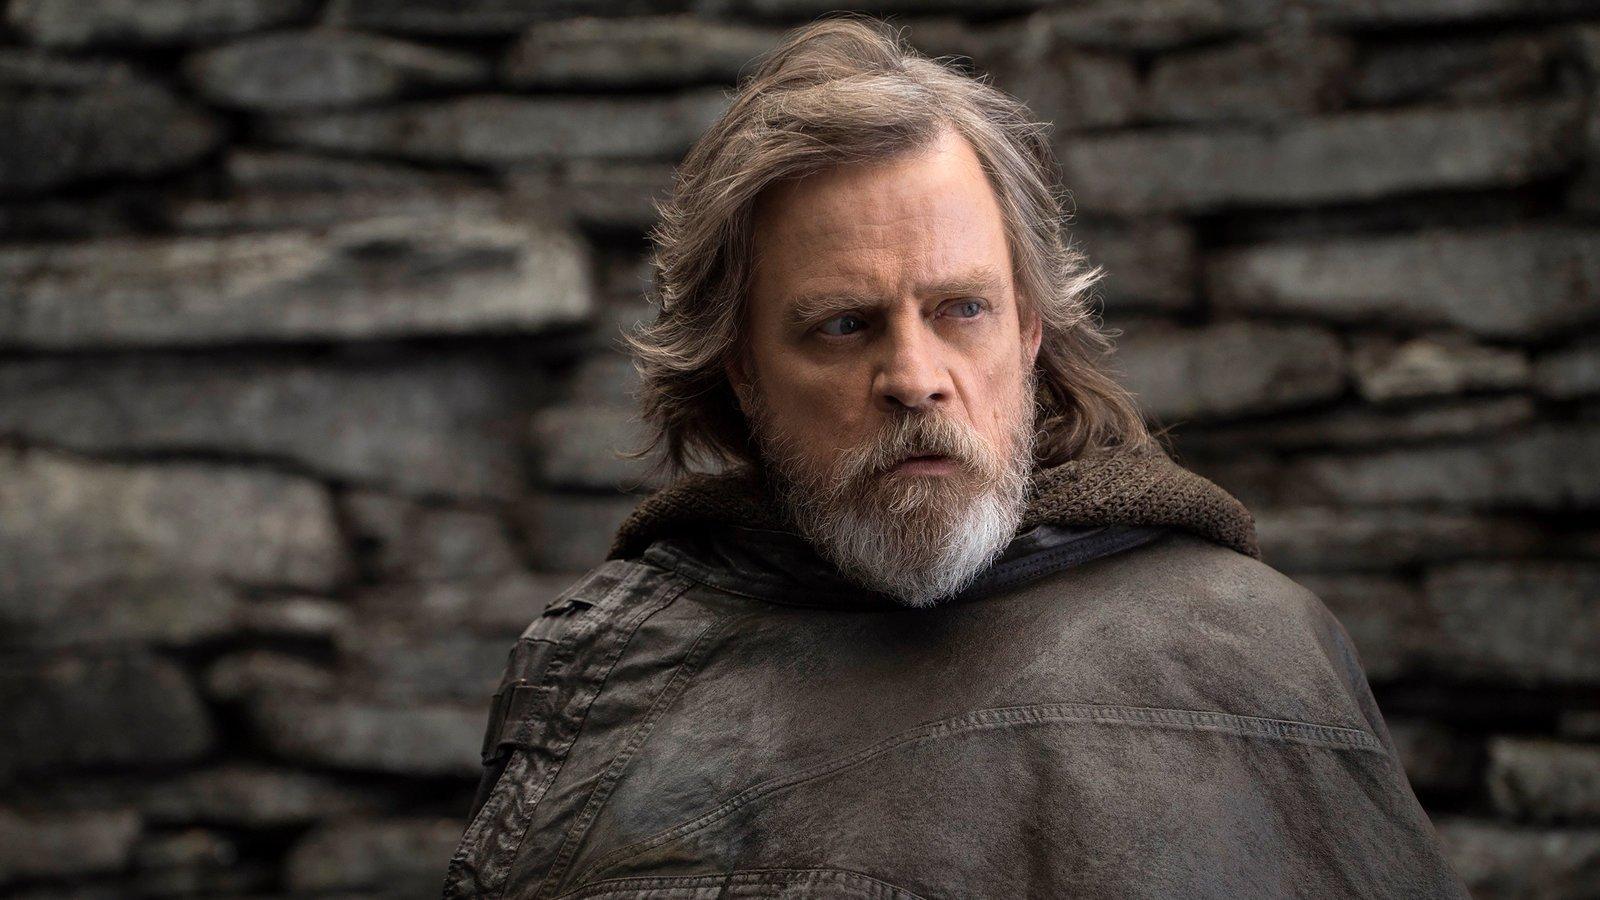 Mark Hamill Is Officially Done With Luke Skywalker